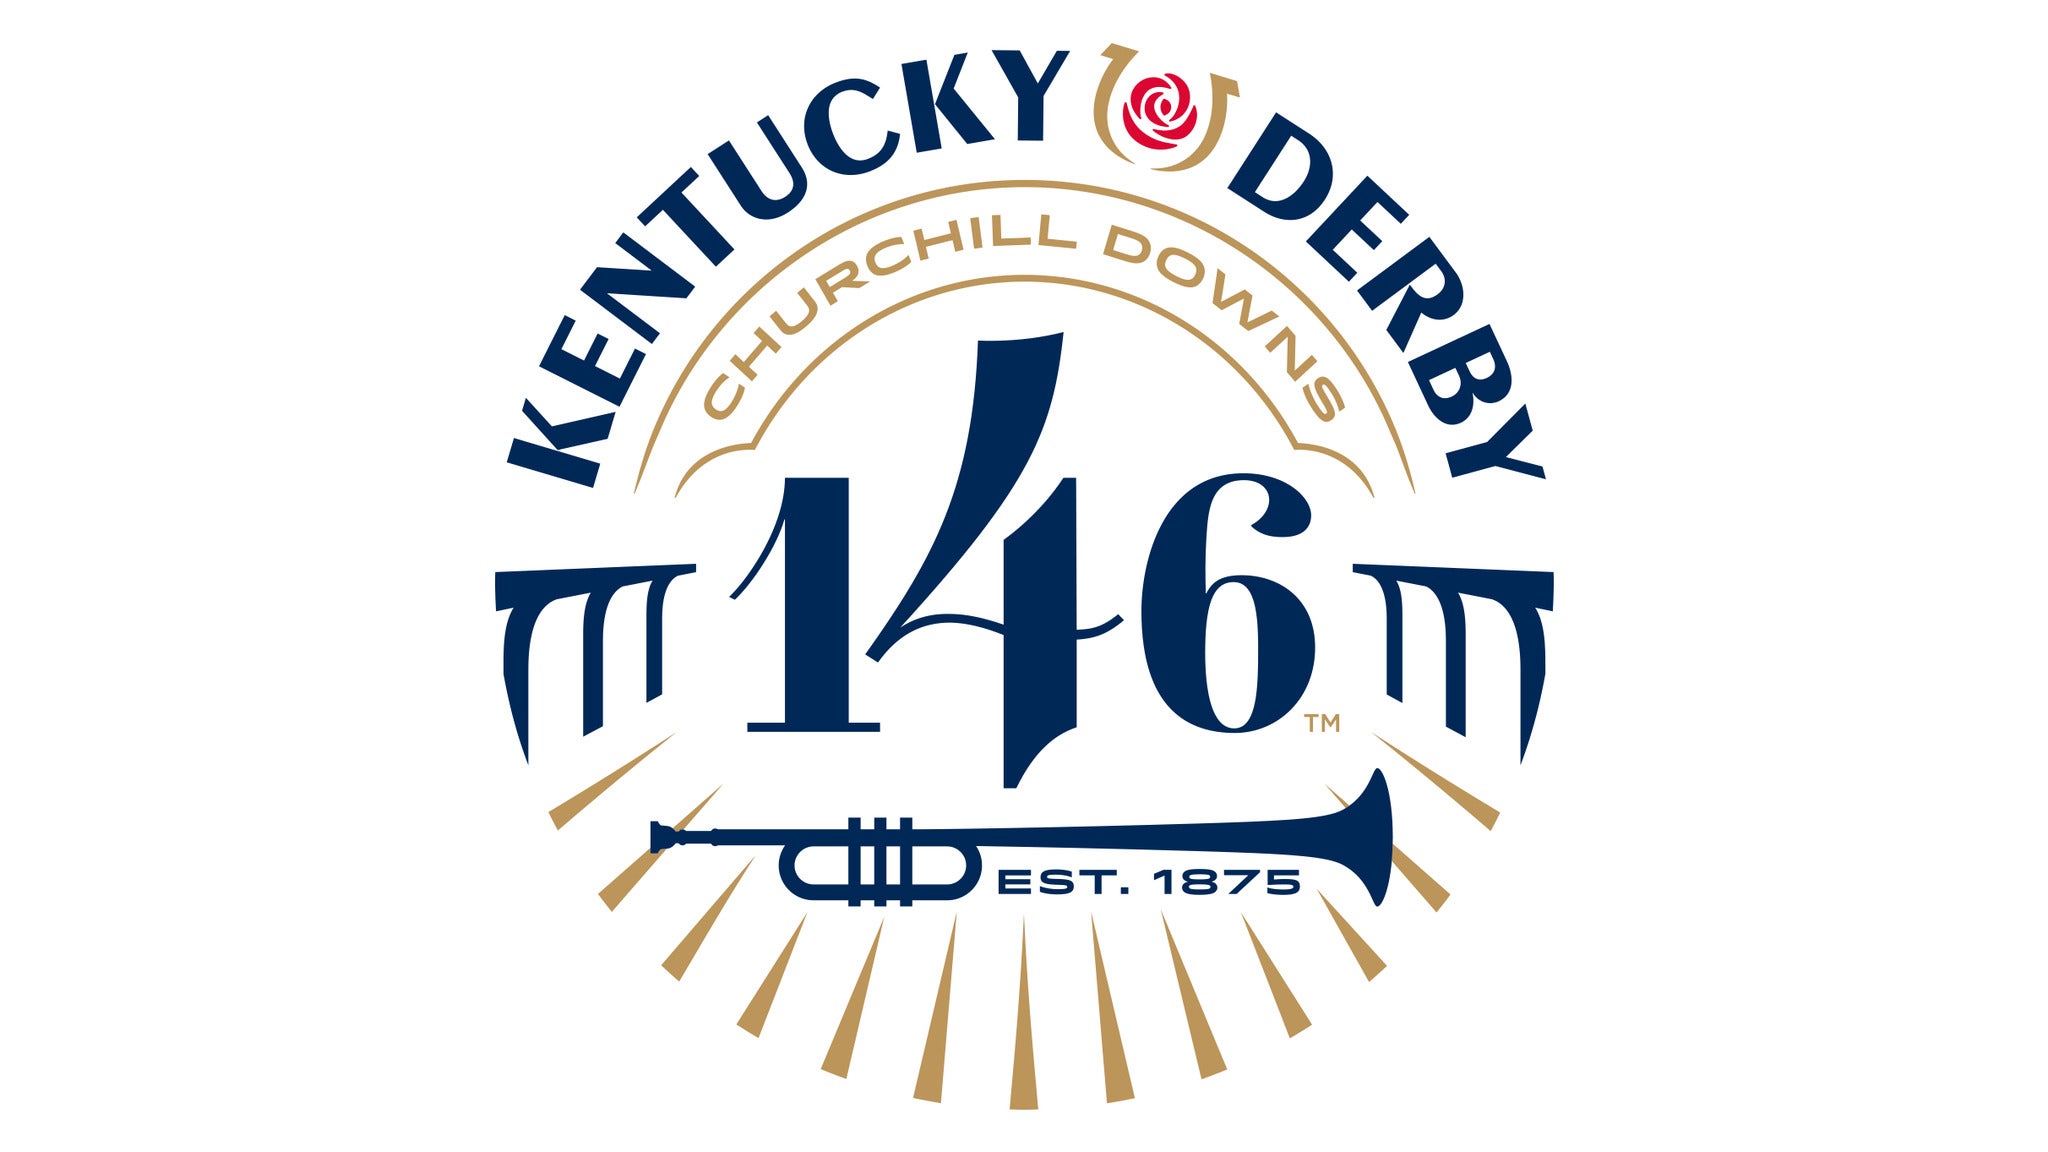 146th Kentucky Derby - Infield & Paddock General Admission Single Day in Louisville promo photo for Day of Race Purchase Pricing presale offer code